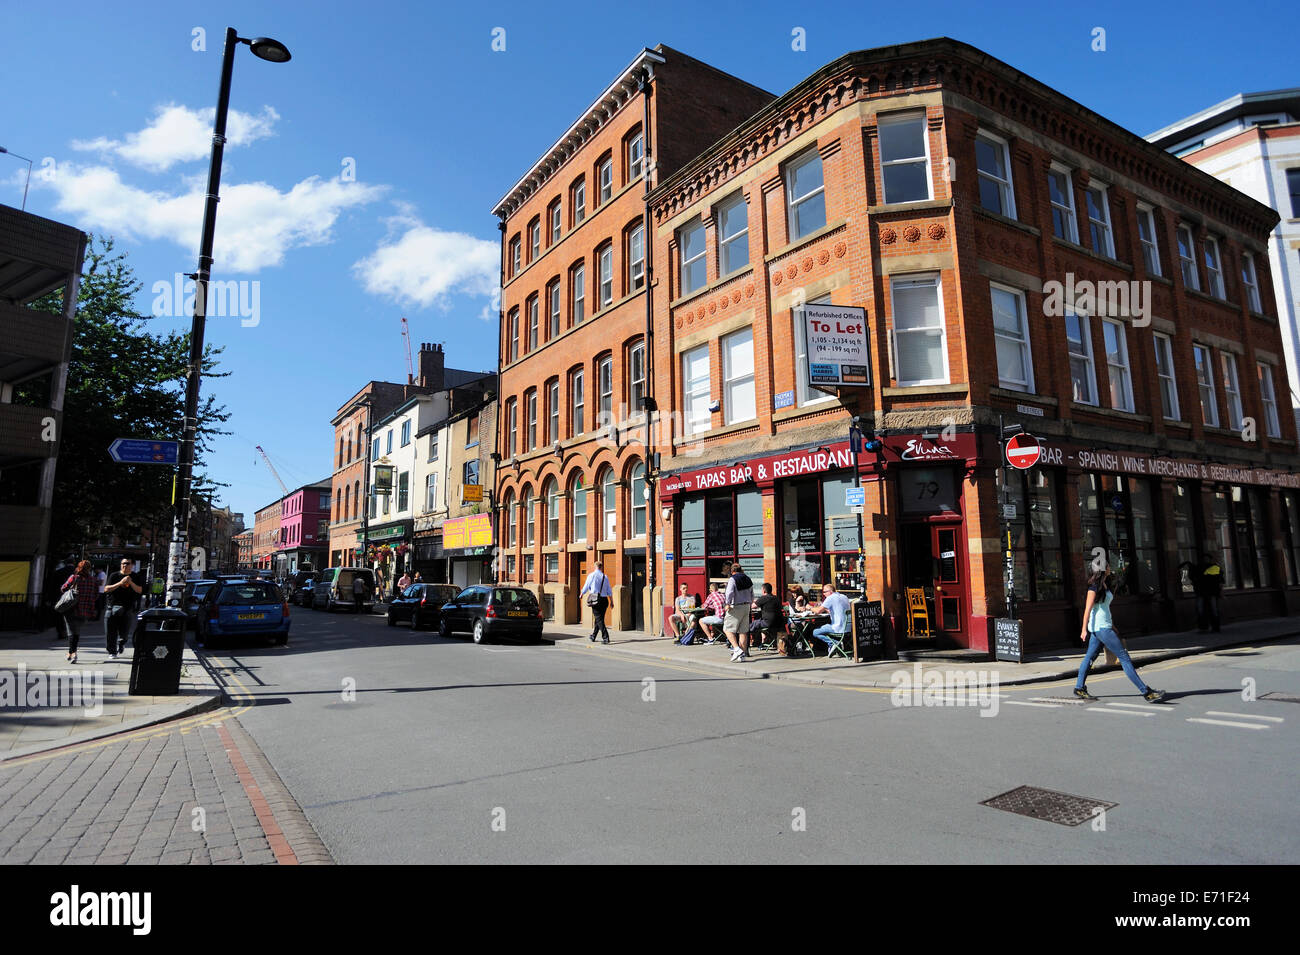 Junction of Thomas and Tib Streets in the Northern Quarter of Manchester - the Cultural Quarter. Stock Photo